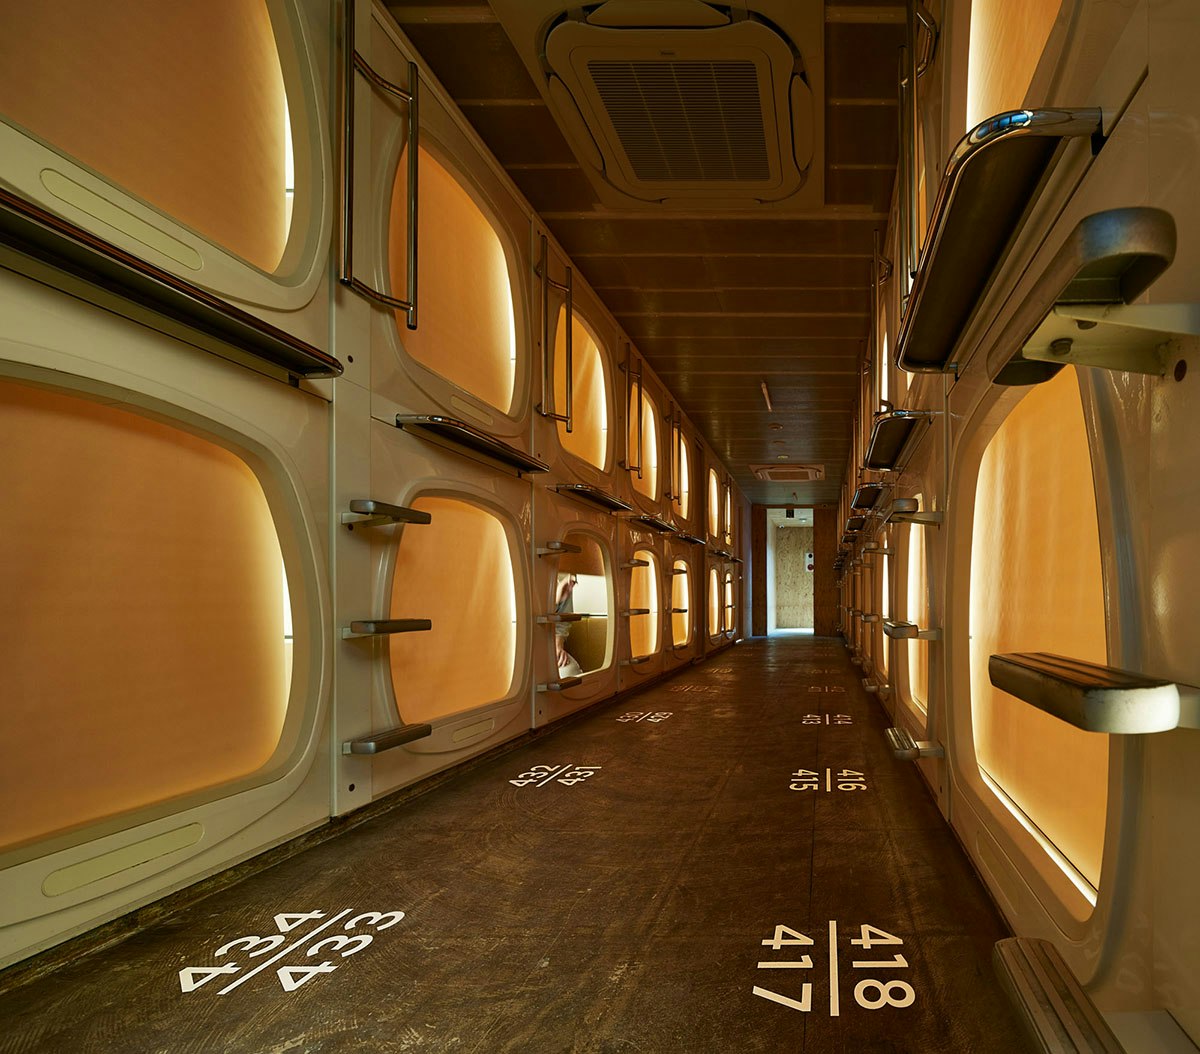 Japan has become famous for its capsule hotels, which often offer travellers good value for money.